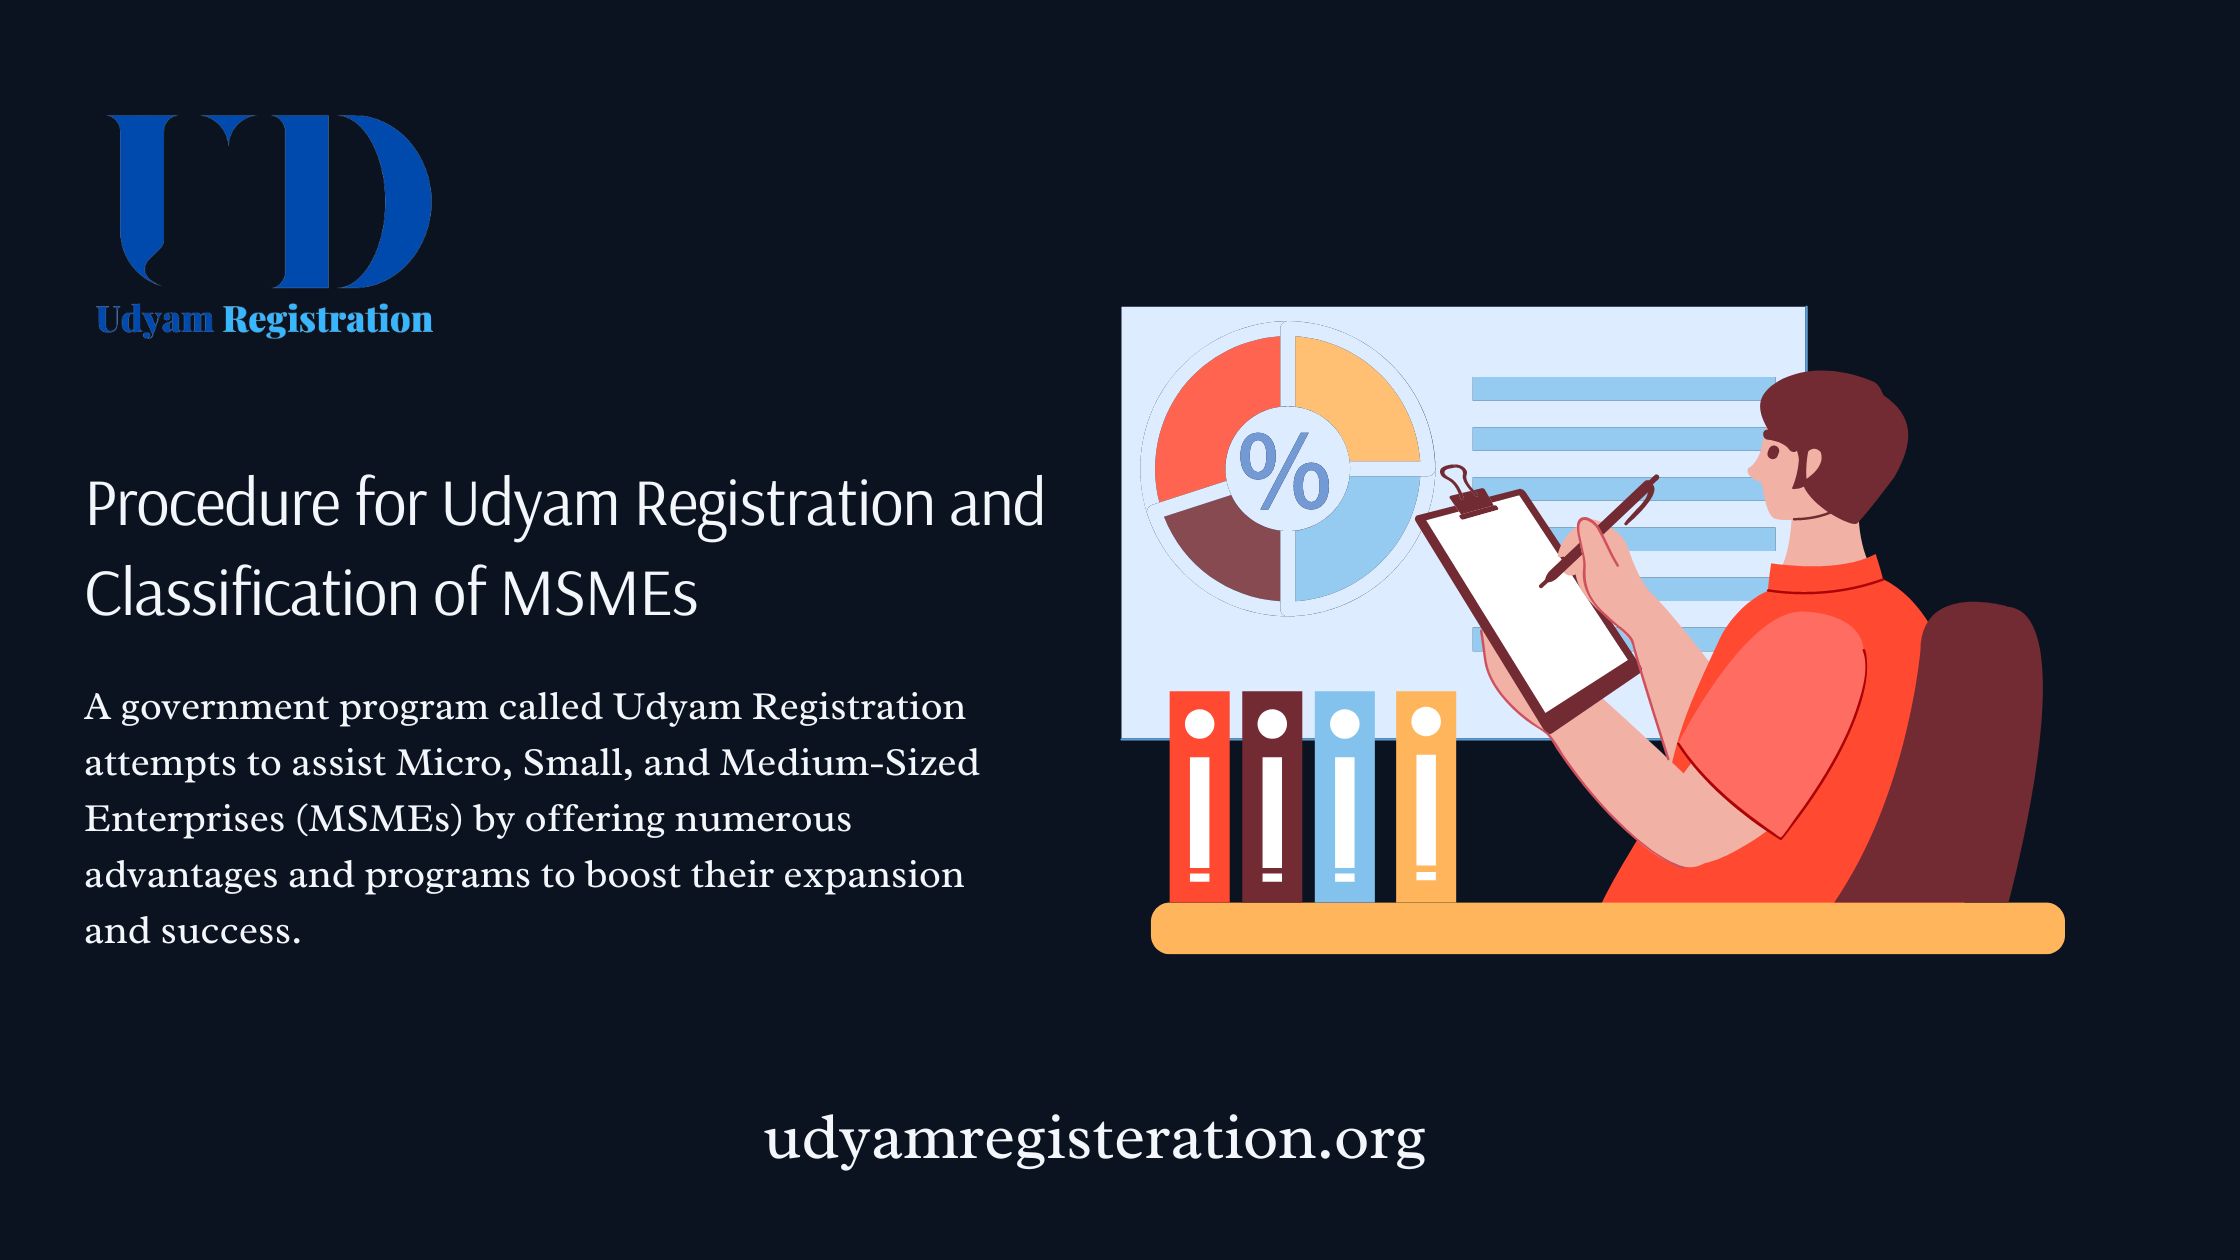 Procedure for Udyam Registration and Classification of MSMEs